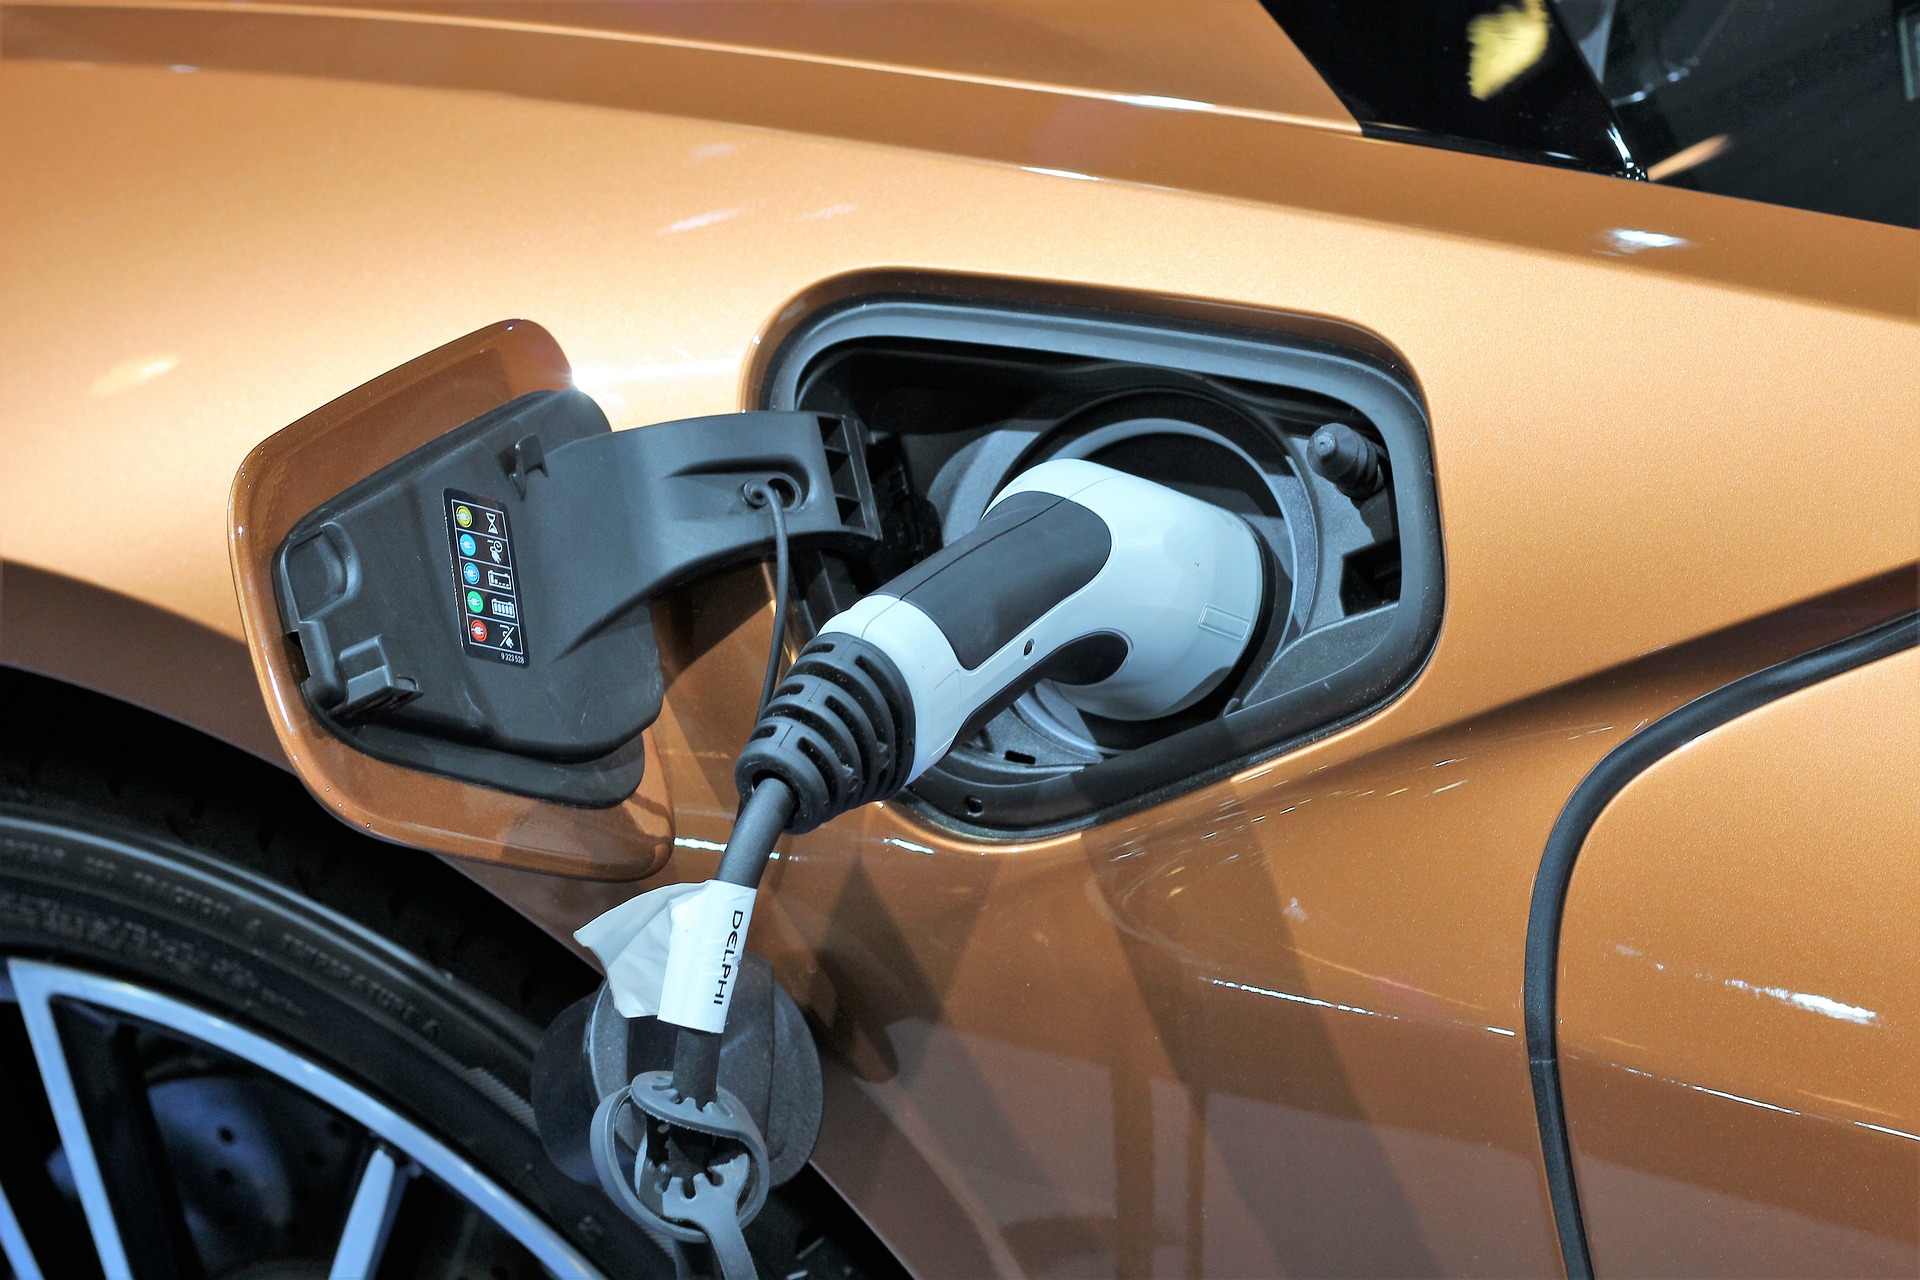 Regulations and infrastructures for electric vehicle charging systems